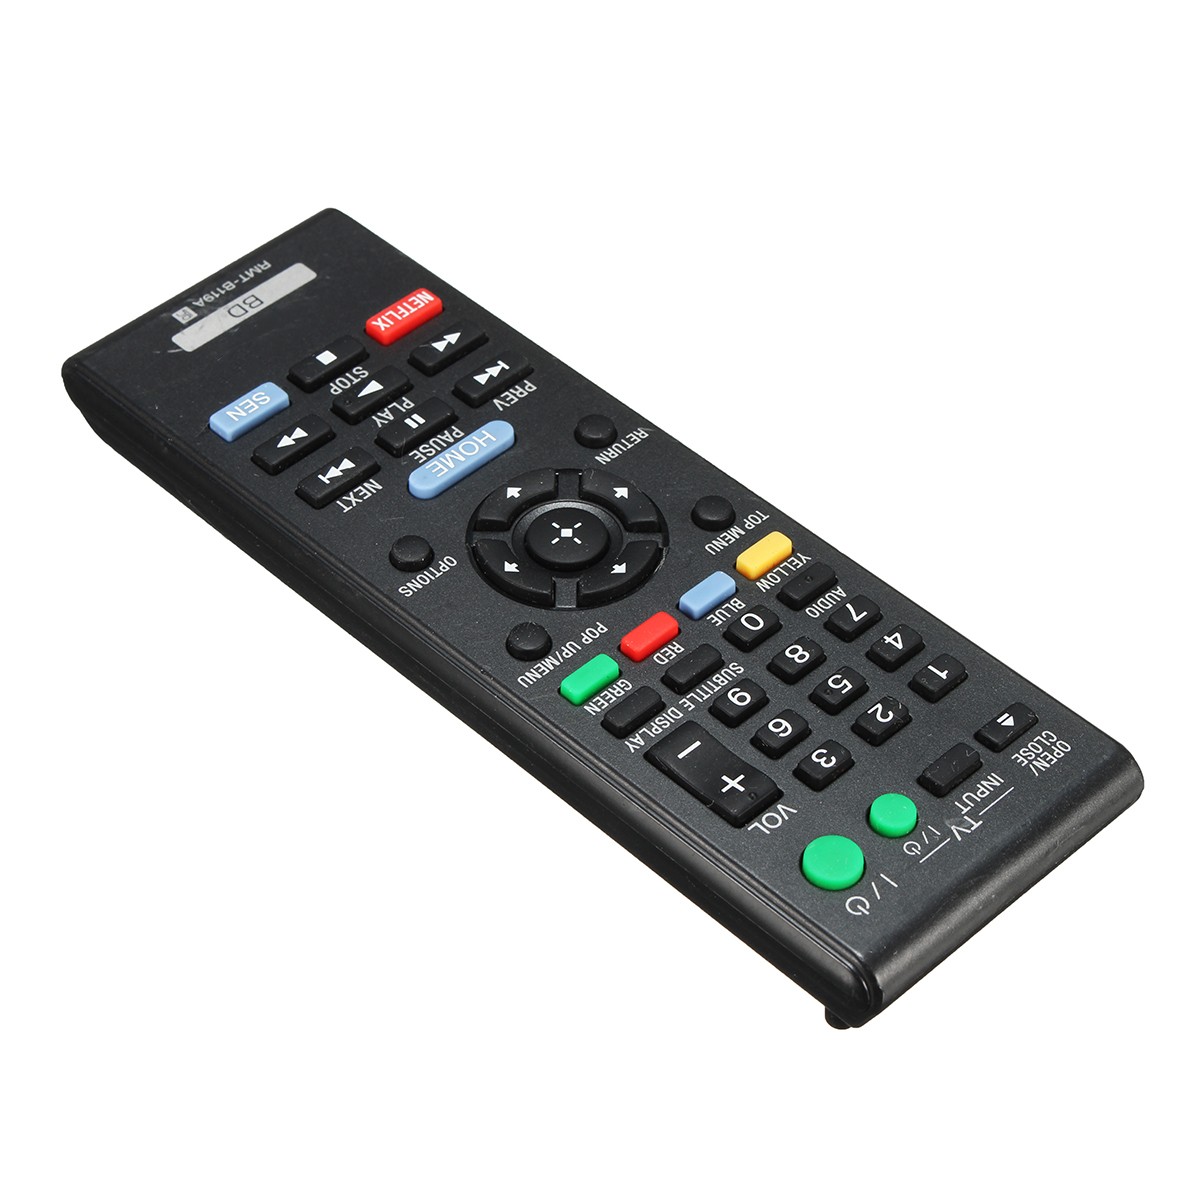 Blue-Ray-Remote-Control-RMT-B119A-fit-for-Sony-BDP-BX59-BDP-S390-BDP-S590-1115226